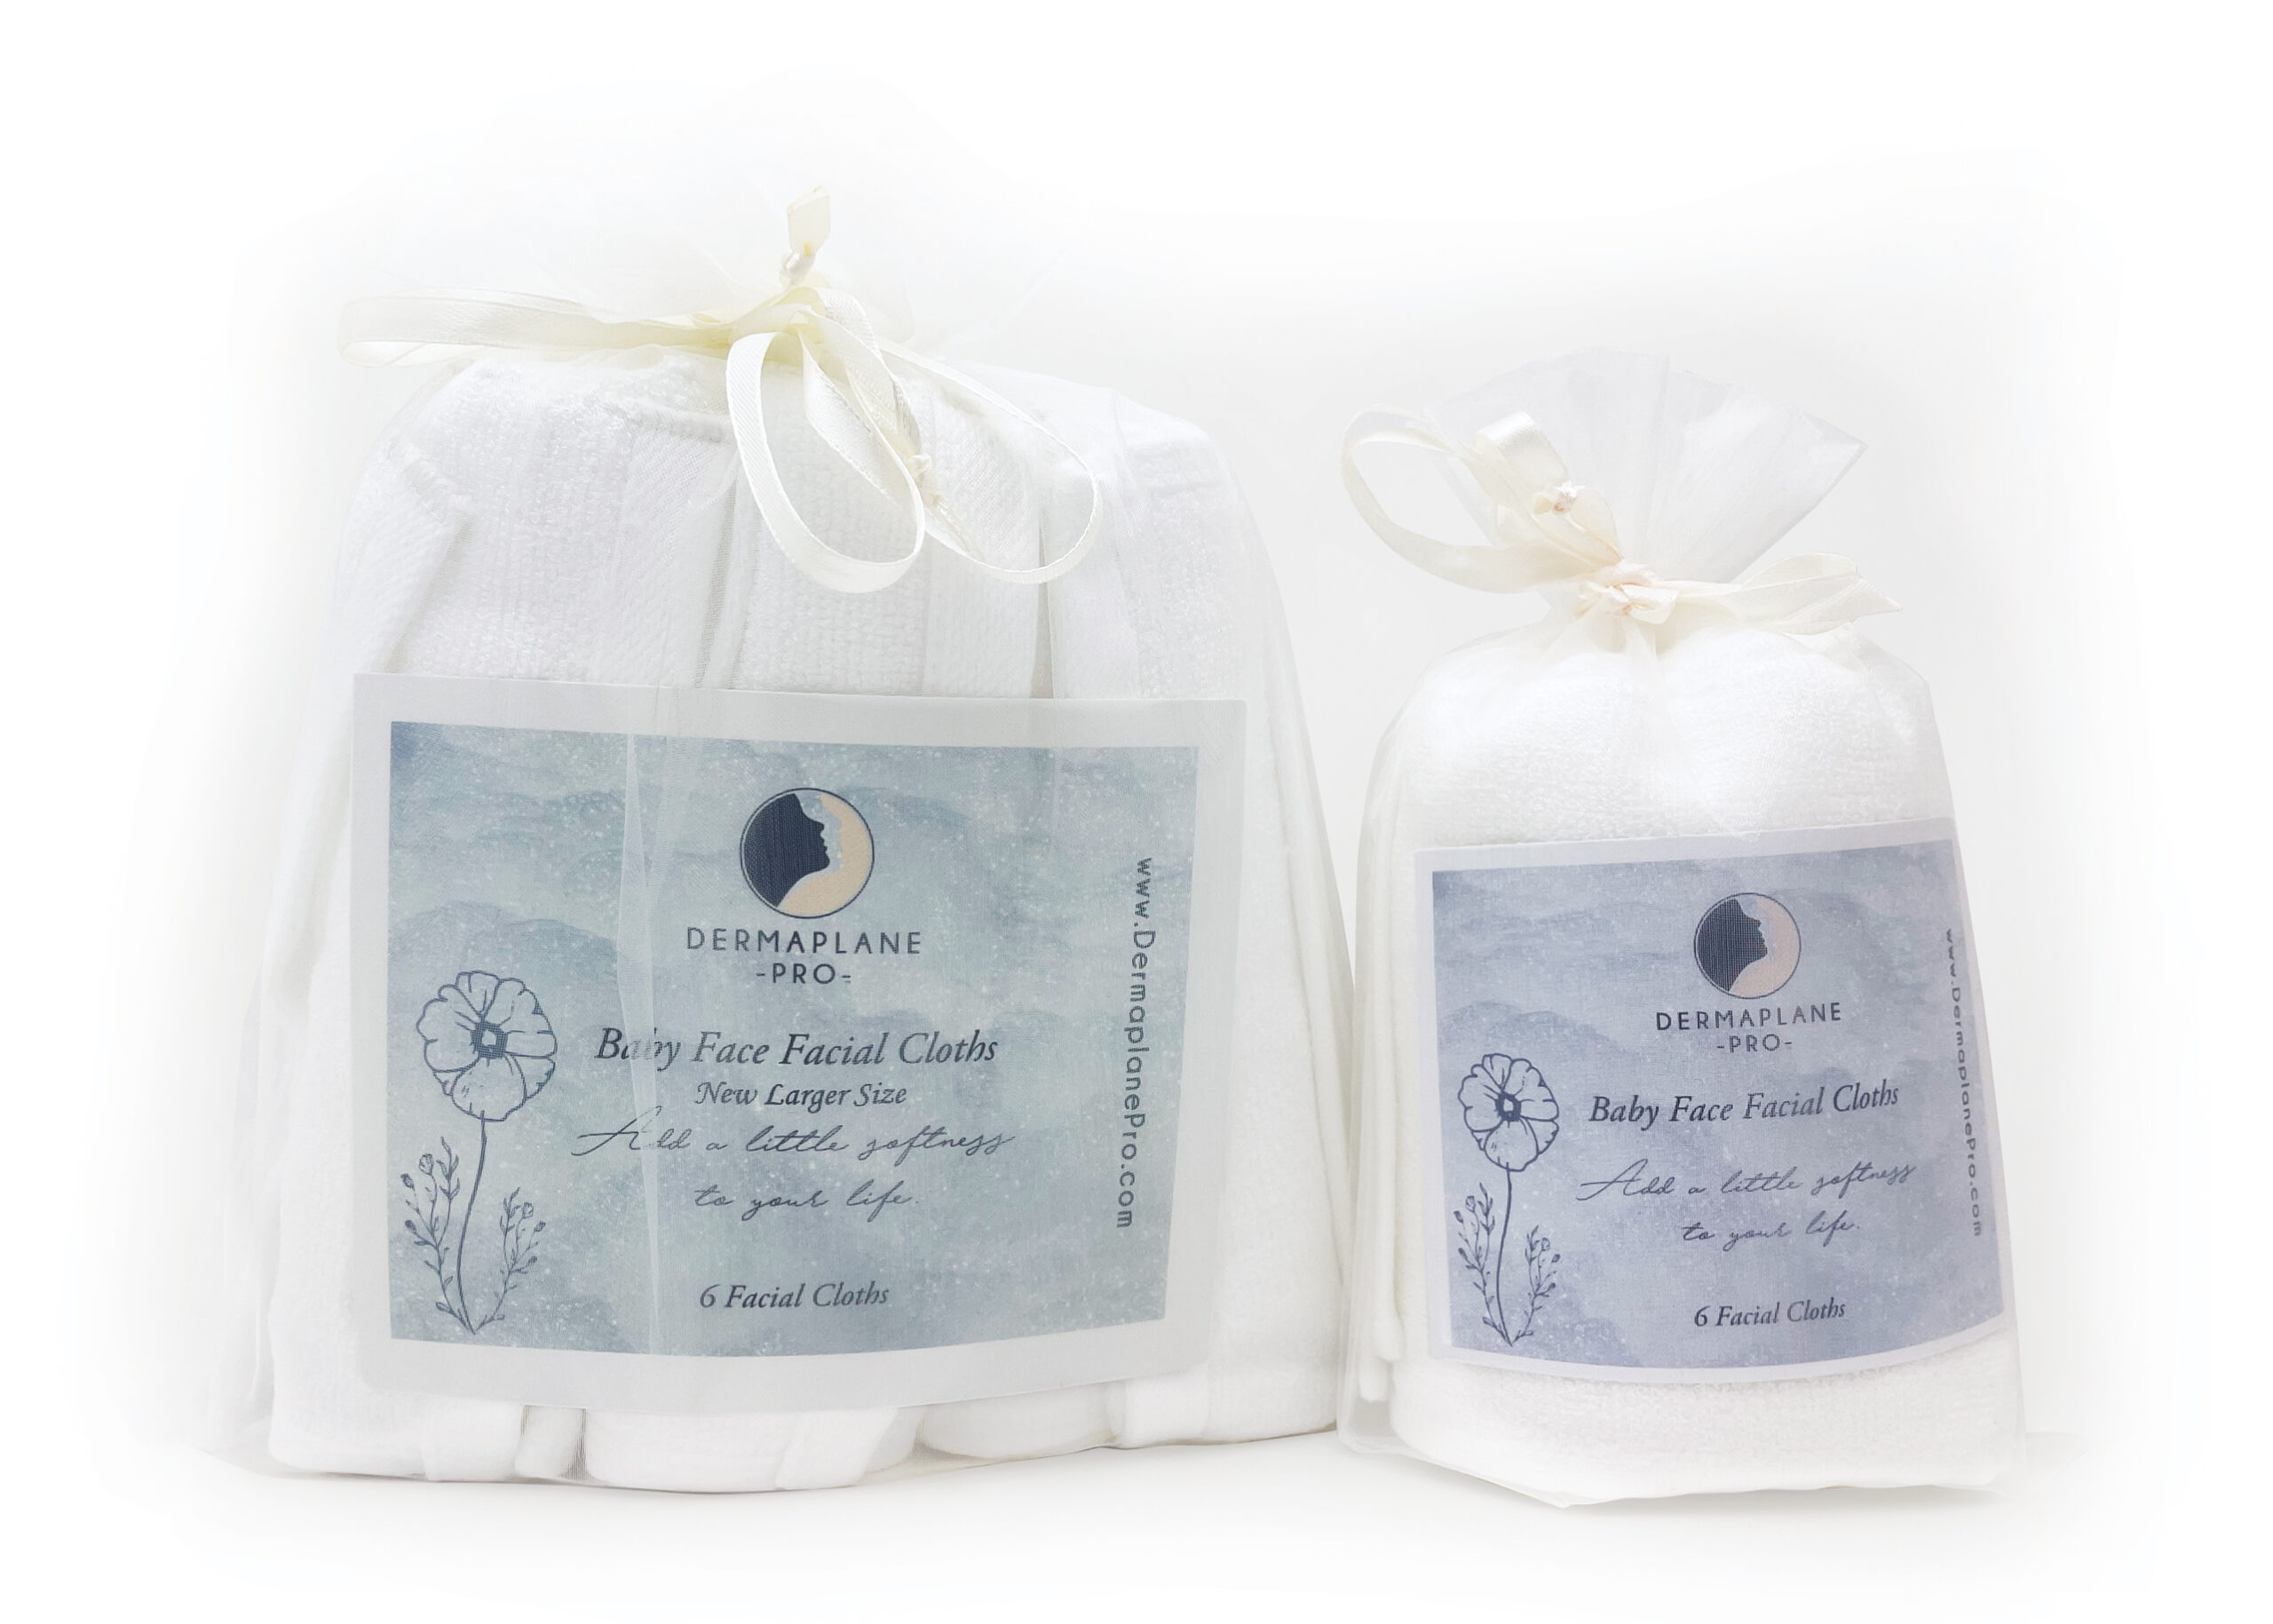 Bundles of large and regular Baby Face Cloths that are perfect for dermaplaning, facials, and other spa treatments. These split facial cloths are made of soft bamboo on a cotton backing.